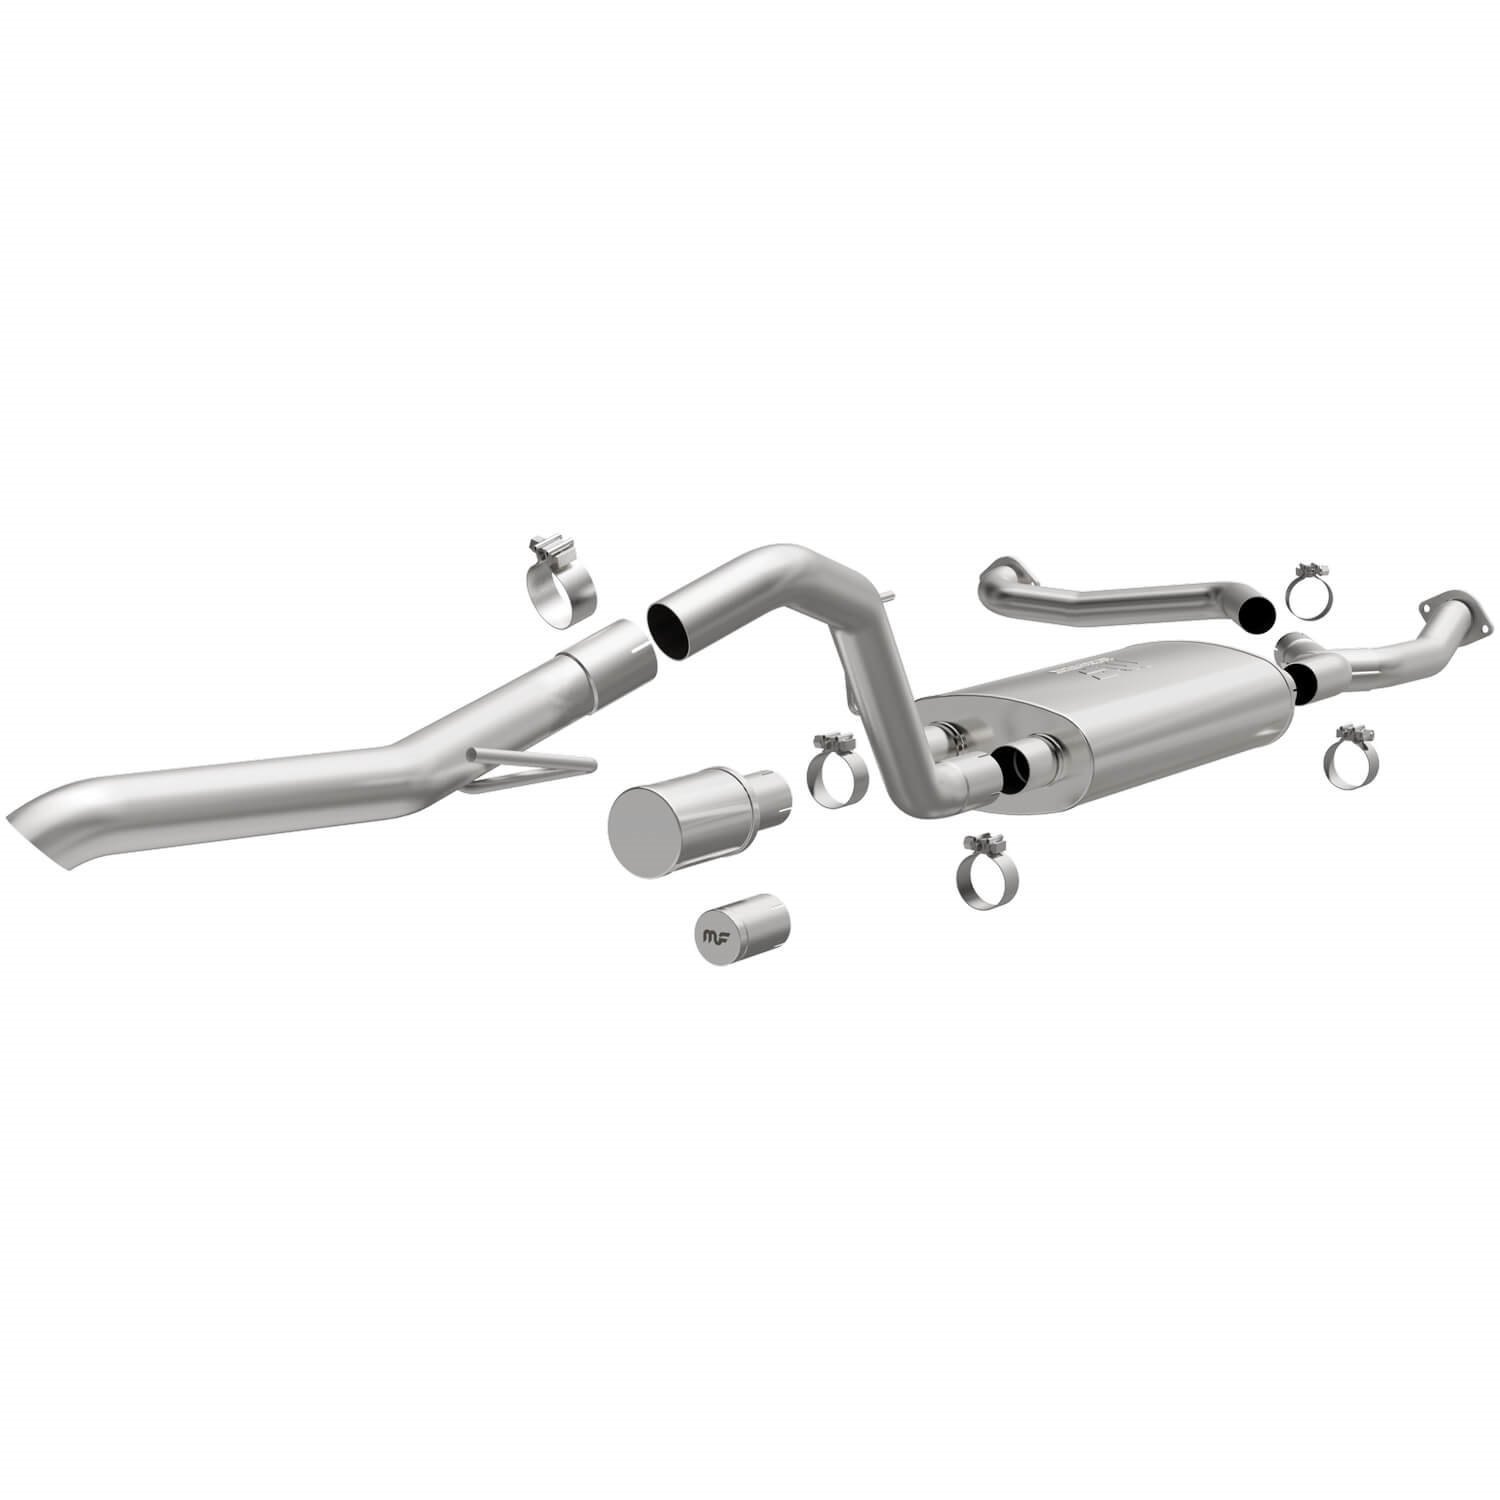 19599 Overland Series Cat-Back Exhaust System fits Select Nissan Frontier 3.8L V6